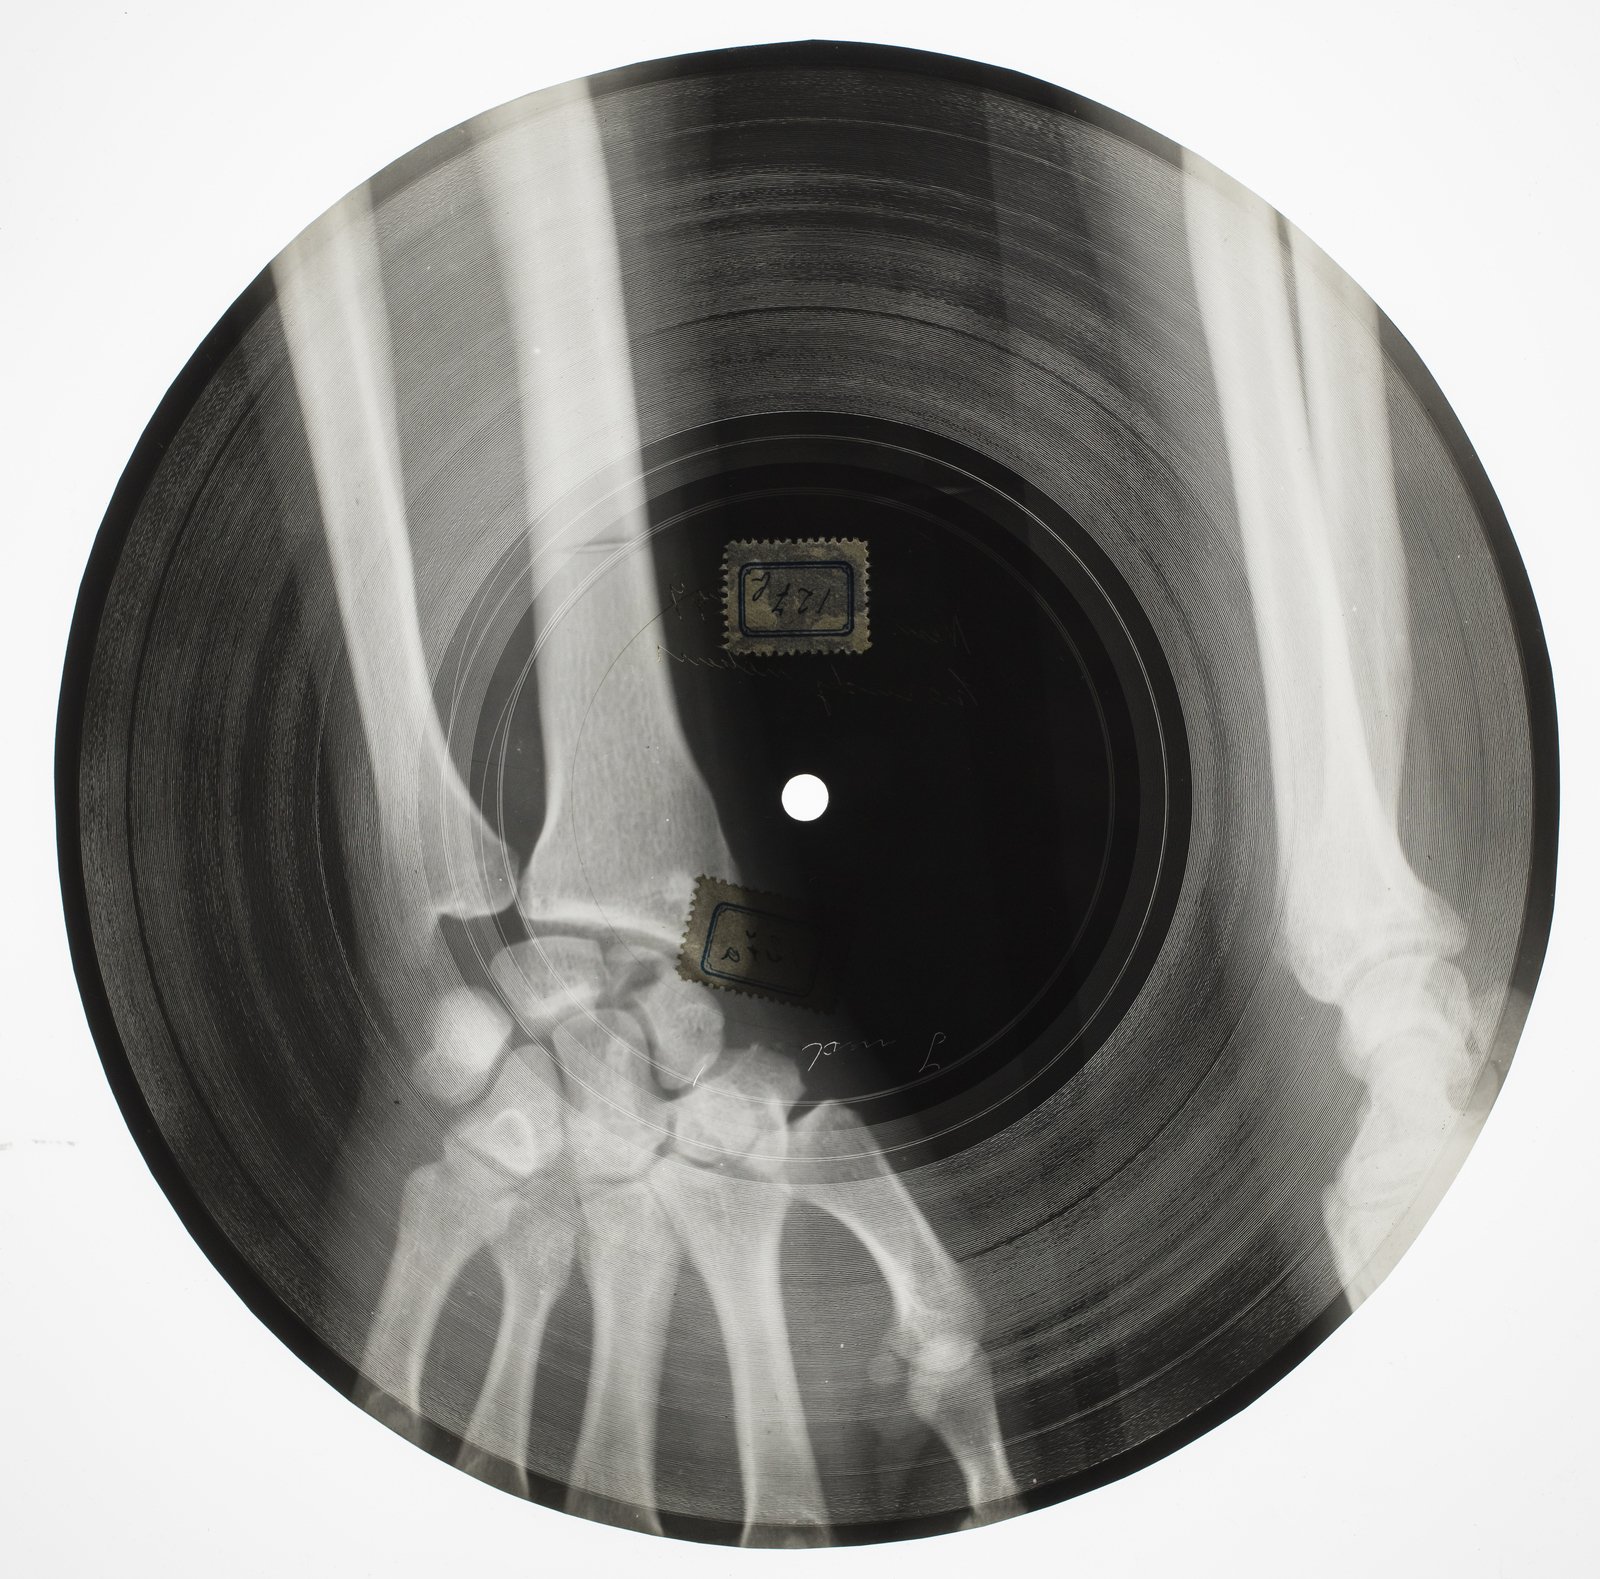 Unknown home recording, Budapest, late 1930s&ndash; early 1940sLathe-/hand-cut record on x-ray film, 22cm diameterCollection of Janos Sebasteyn / National Sz&eacute;ch&eacute;nyi LibraryСourtesy X-Ray Audio, London